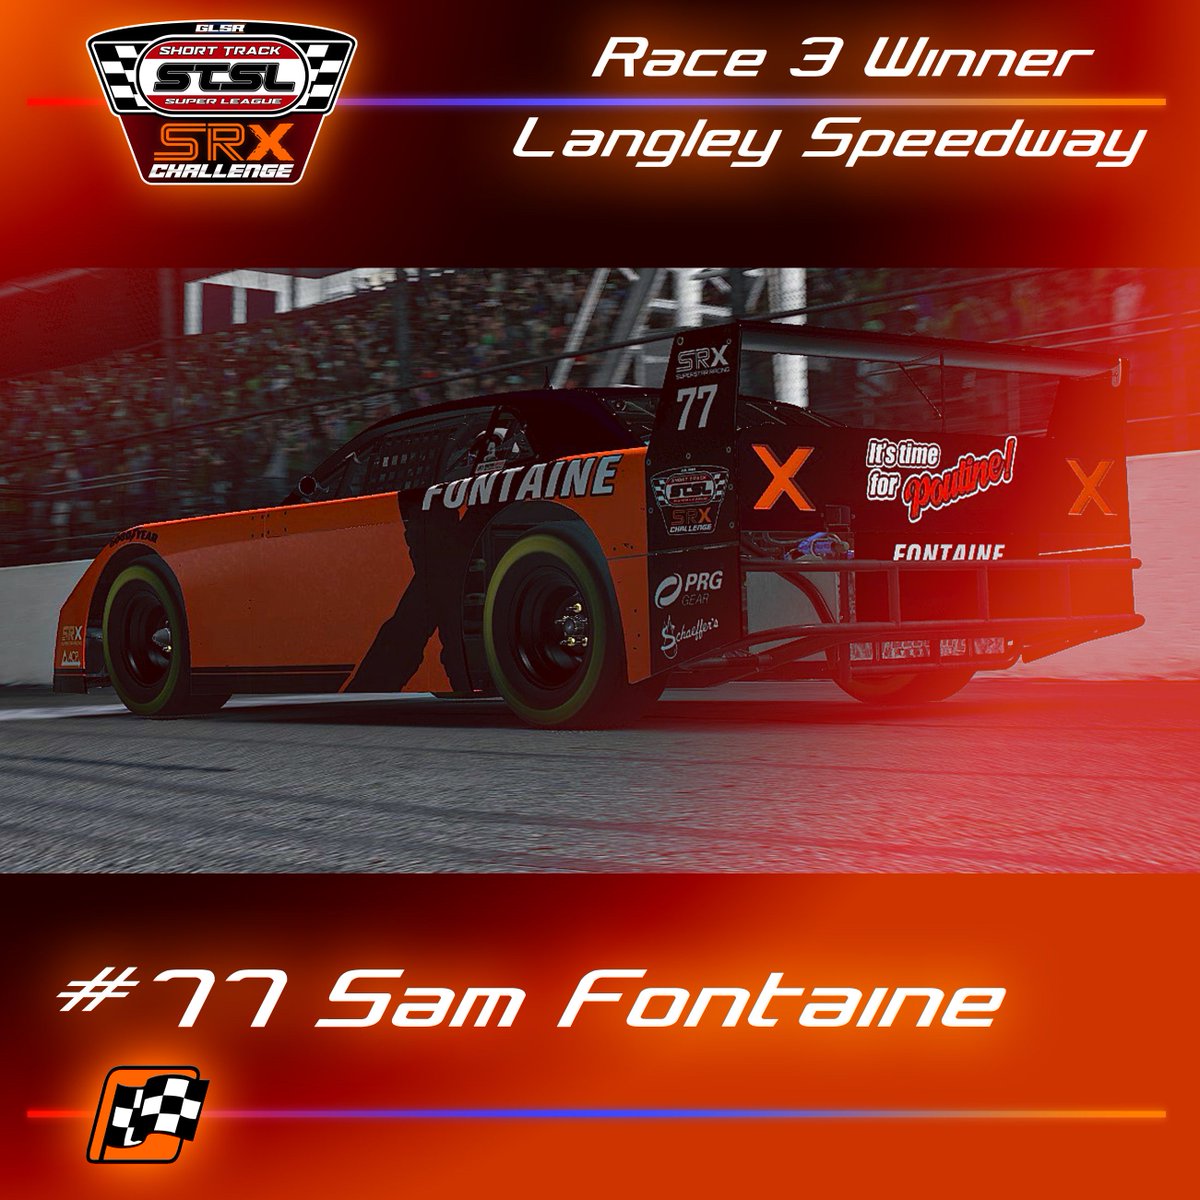 Fontaine wins it at Langley Speedway! Smaller field tonight but still tons of action throughout the field. The track was tricky and it showed early with multiple  wrecks. Check out Extreme Sim TV for the replay of the race!

#simracing #shorttrack #GLSR #league